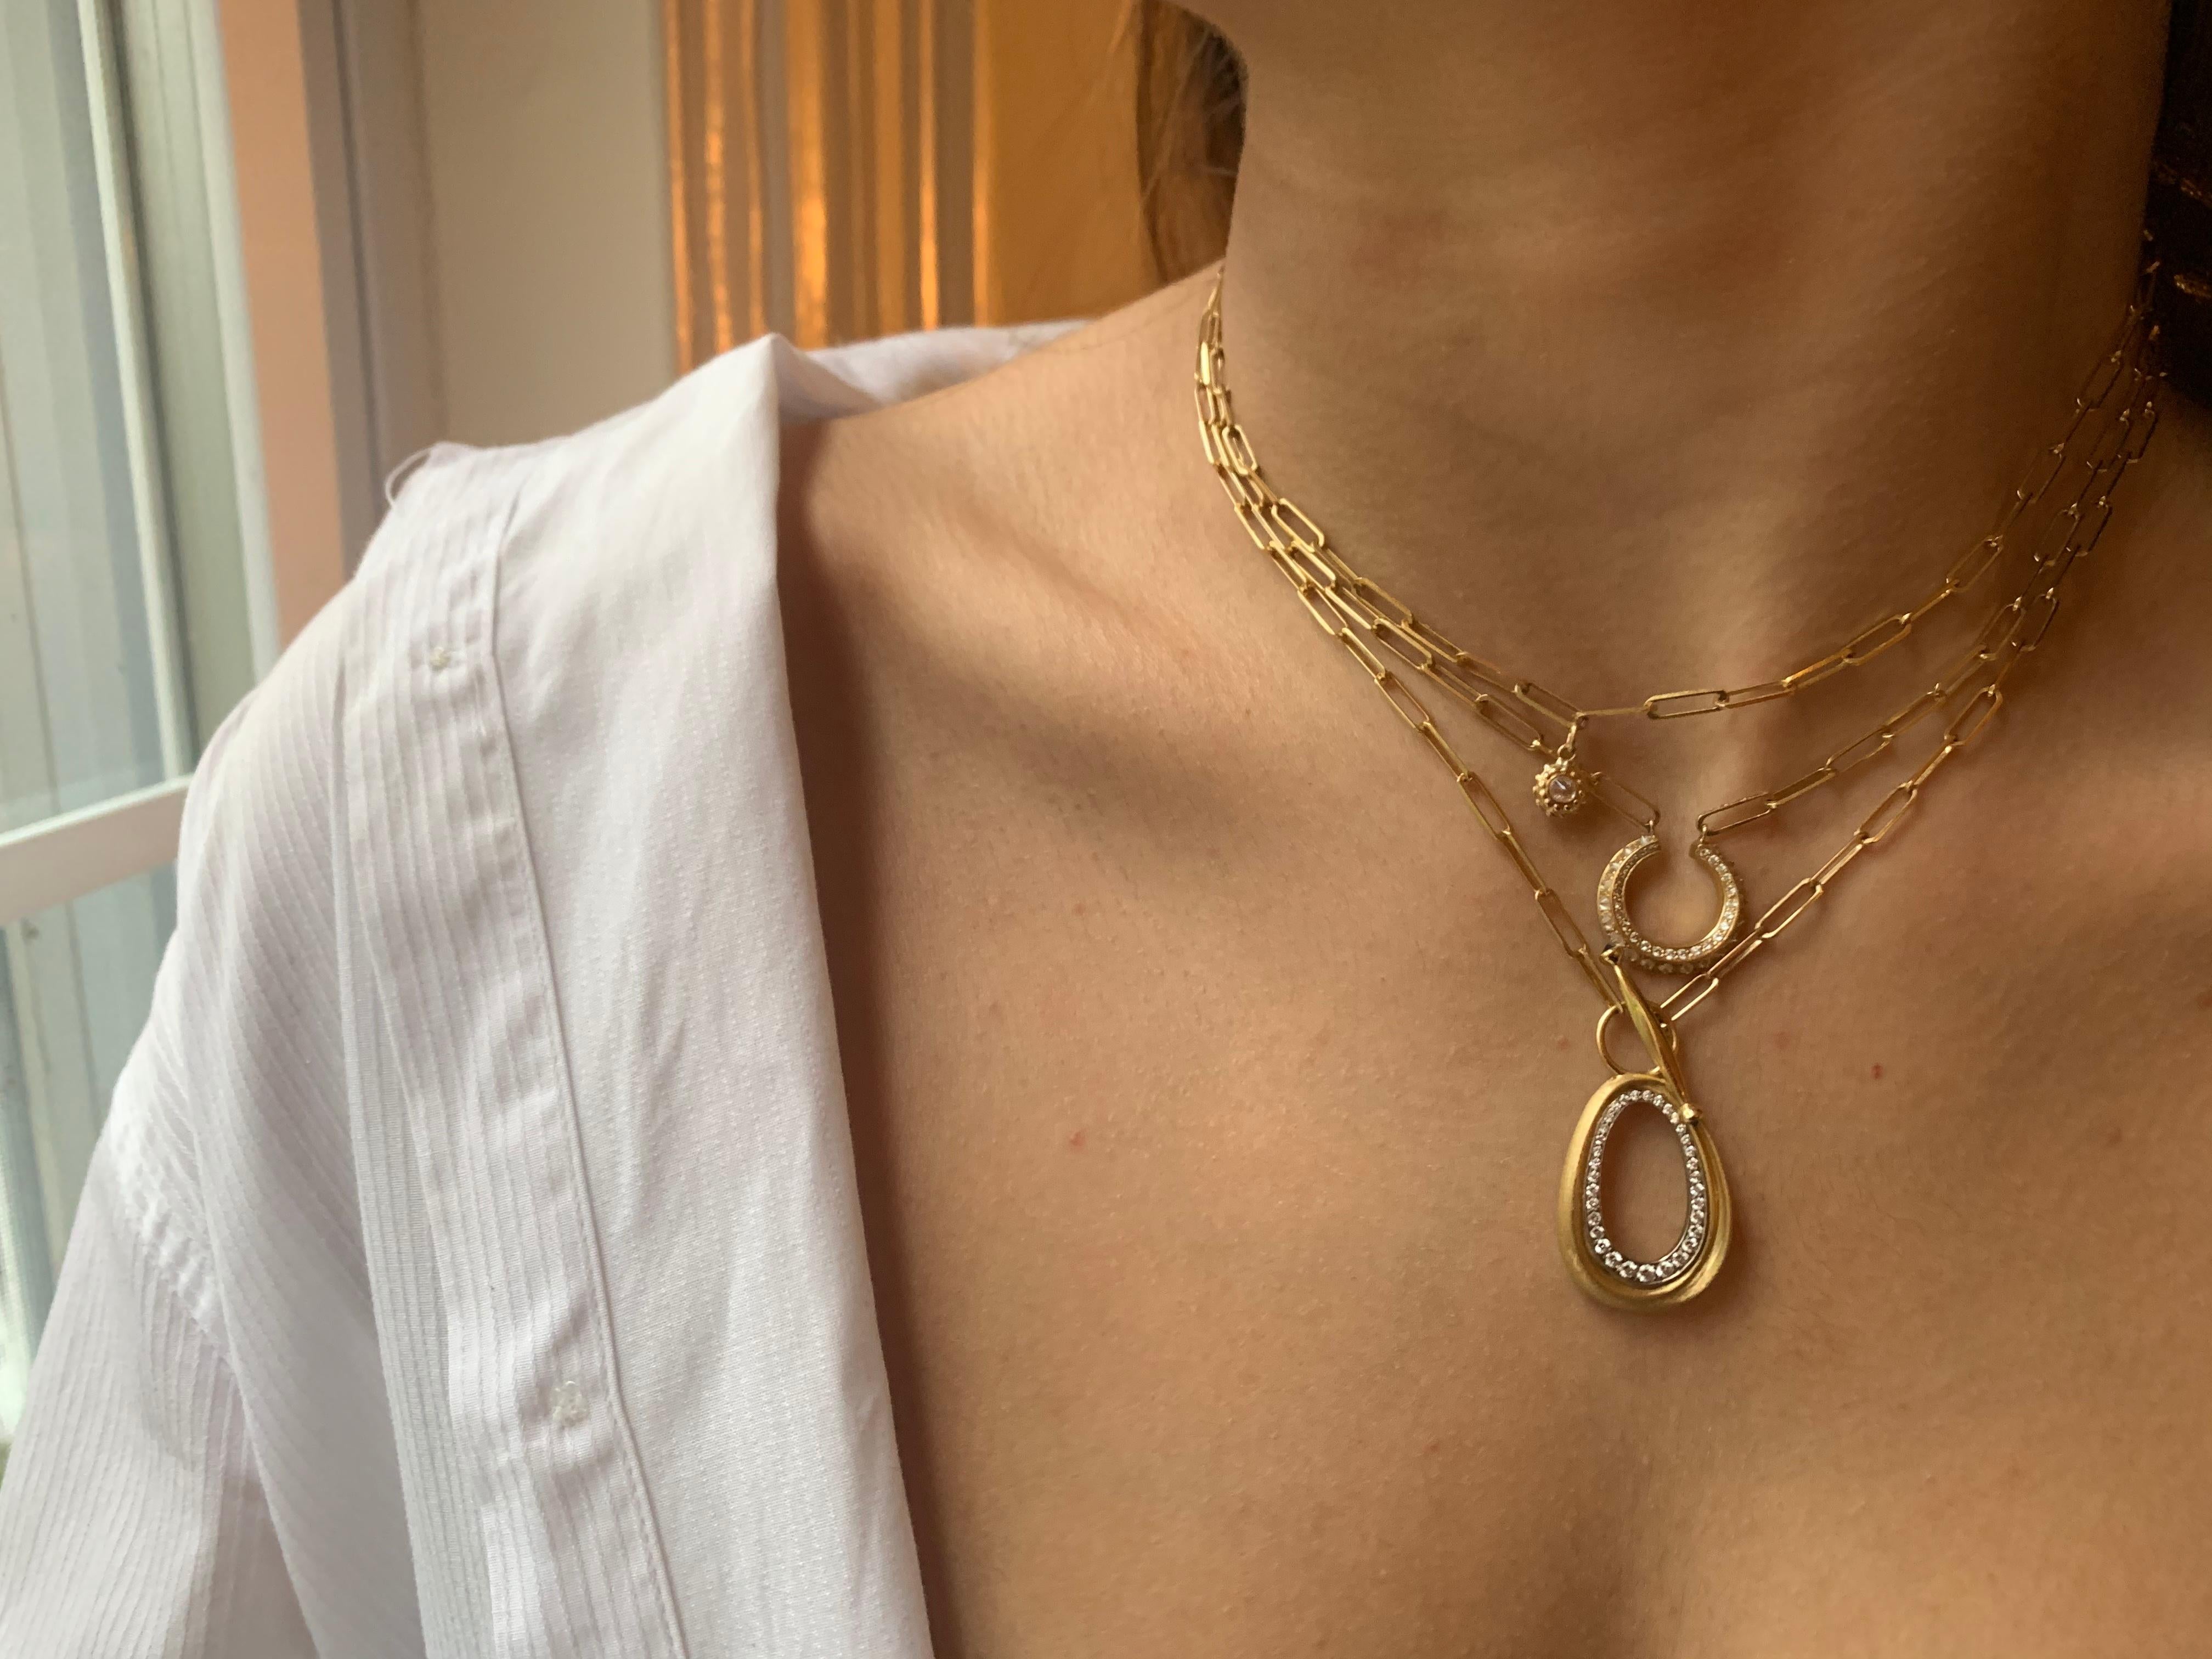 The ‘Lullaby of Broadway’ Necklace is the essence of AnaKatarina Design: sensual femininity with an attitude. The stone etched yellow gold drop is sculpted to form a convex to concave circle creating flirtatious movement.  The seductive oval is